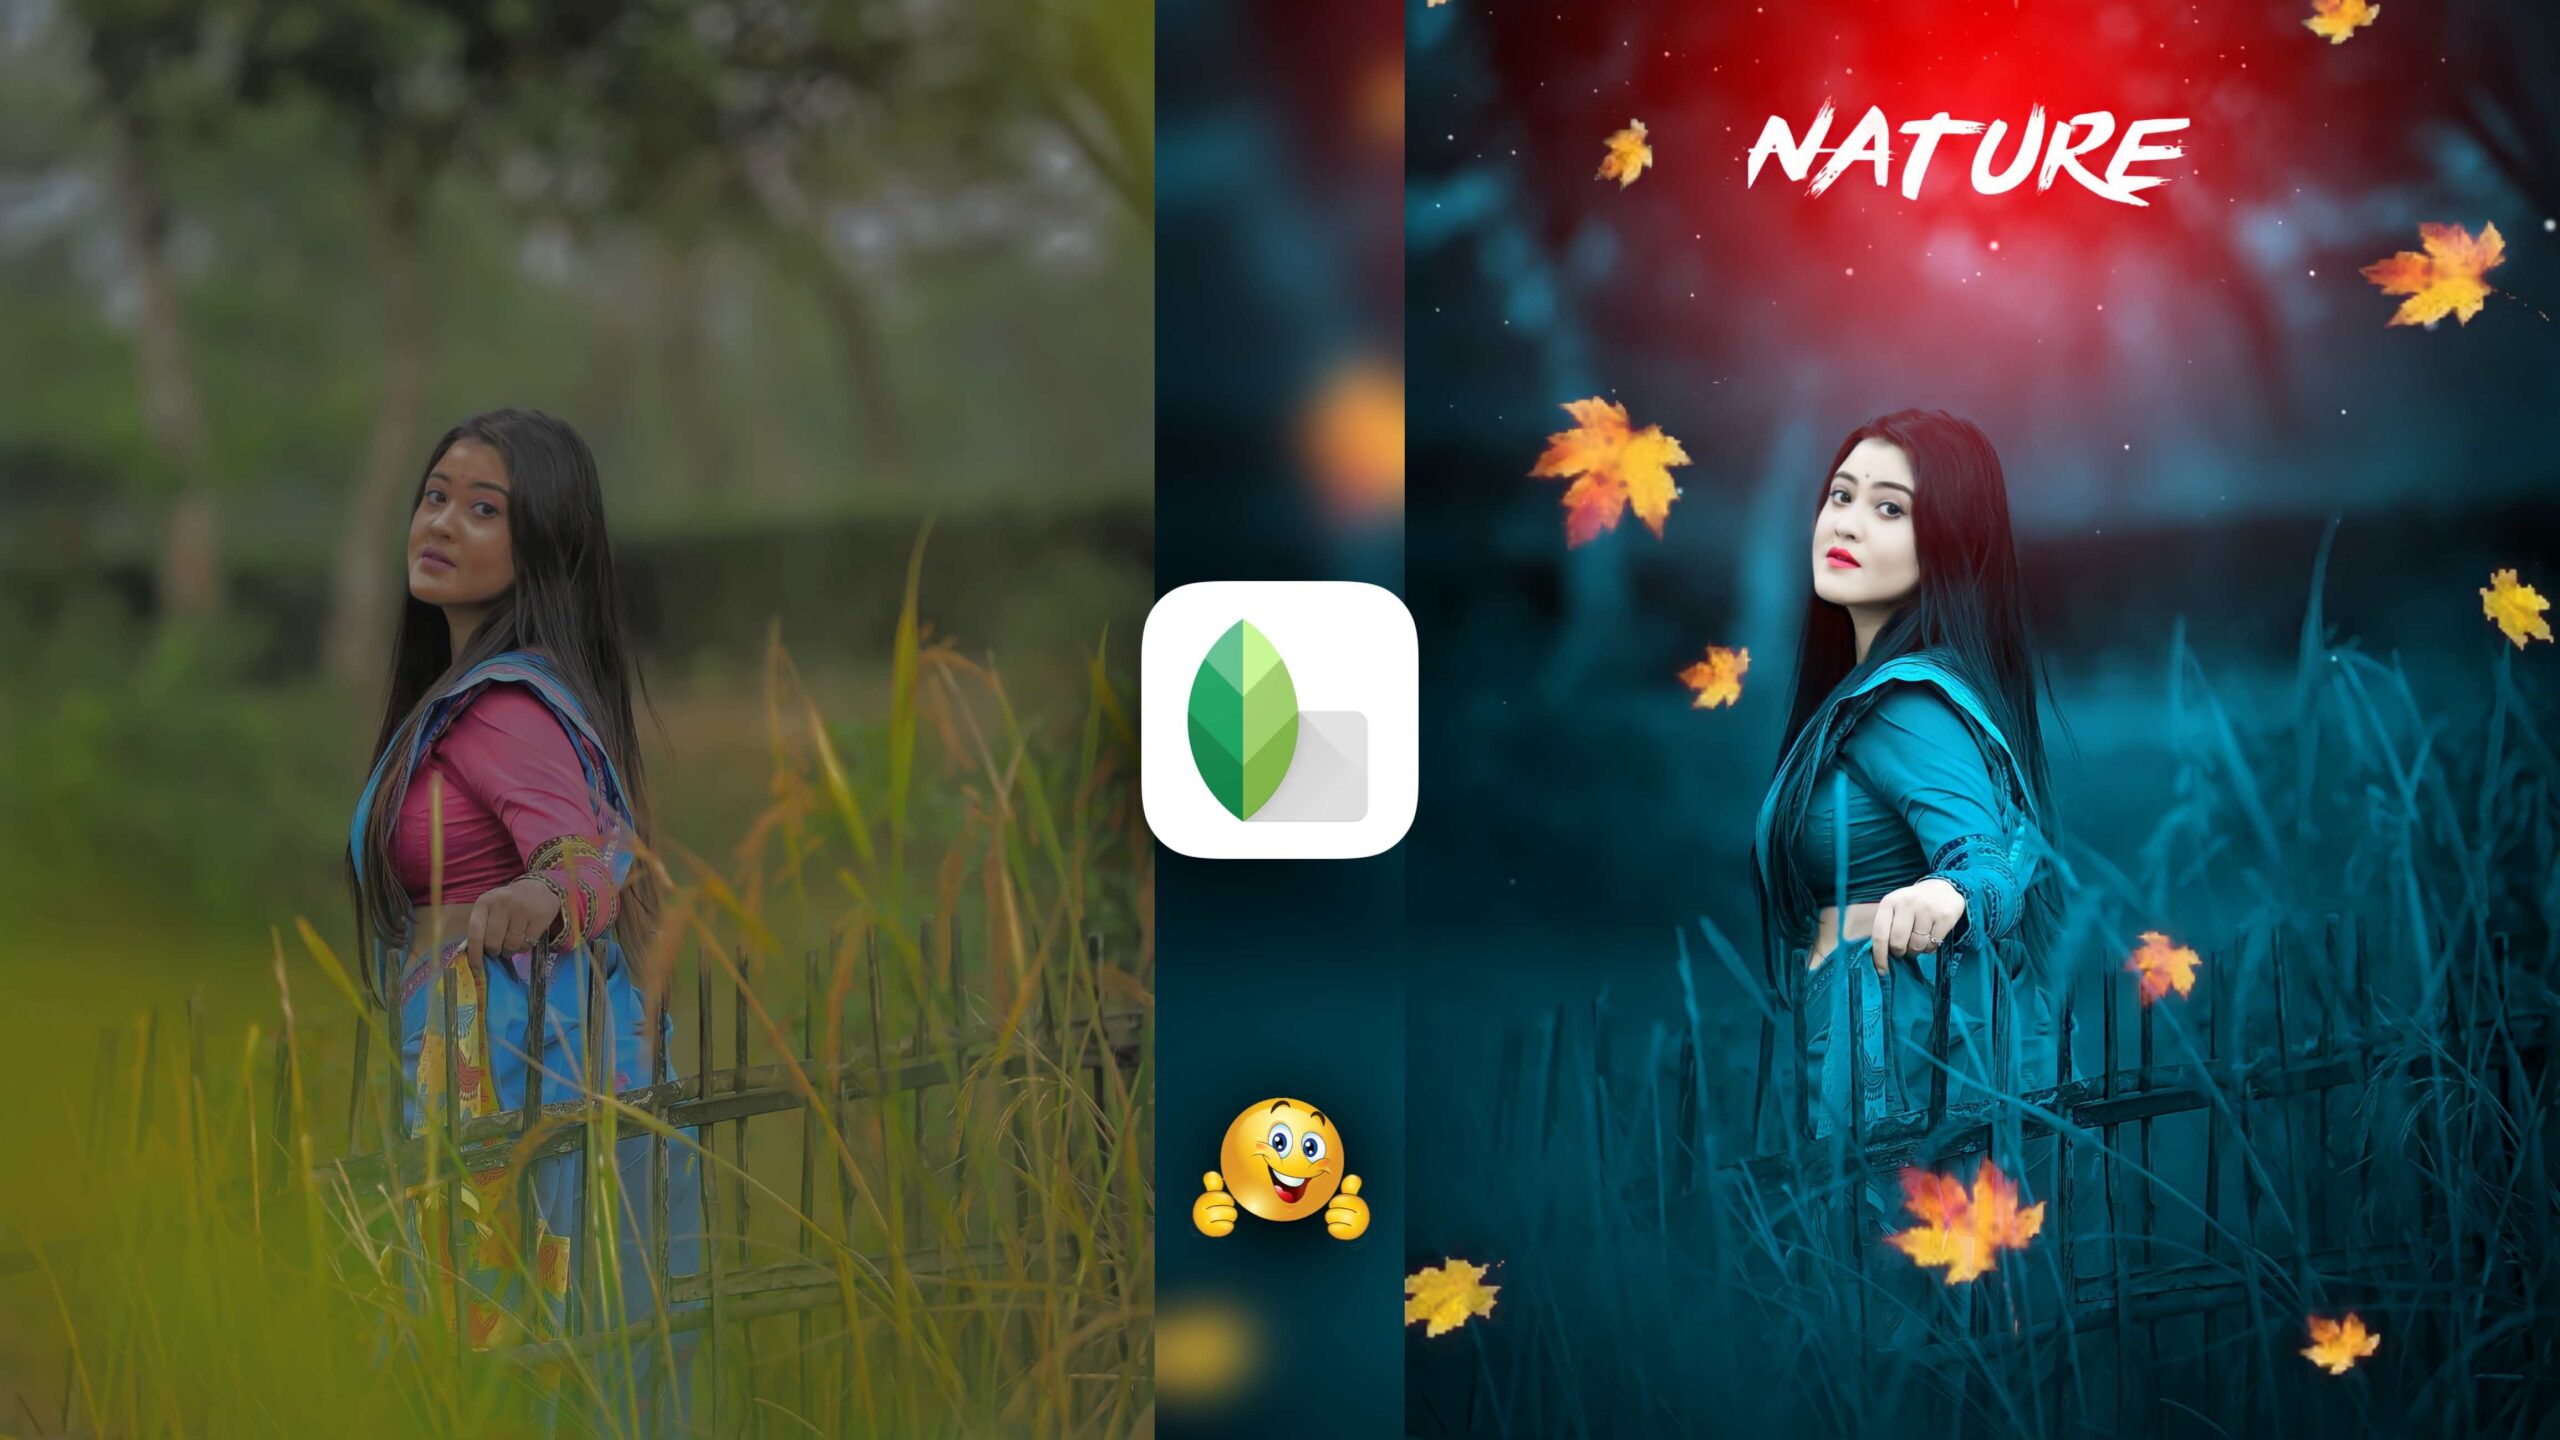 Snapseed Creative Photo Editing Tricks ðŸ”¥ | Snapseed Blue Effect | Snapseed Background Colour Change